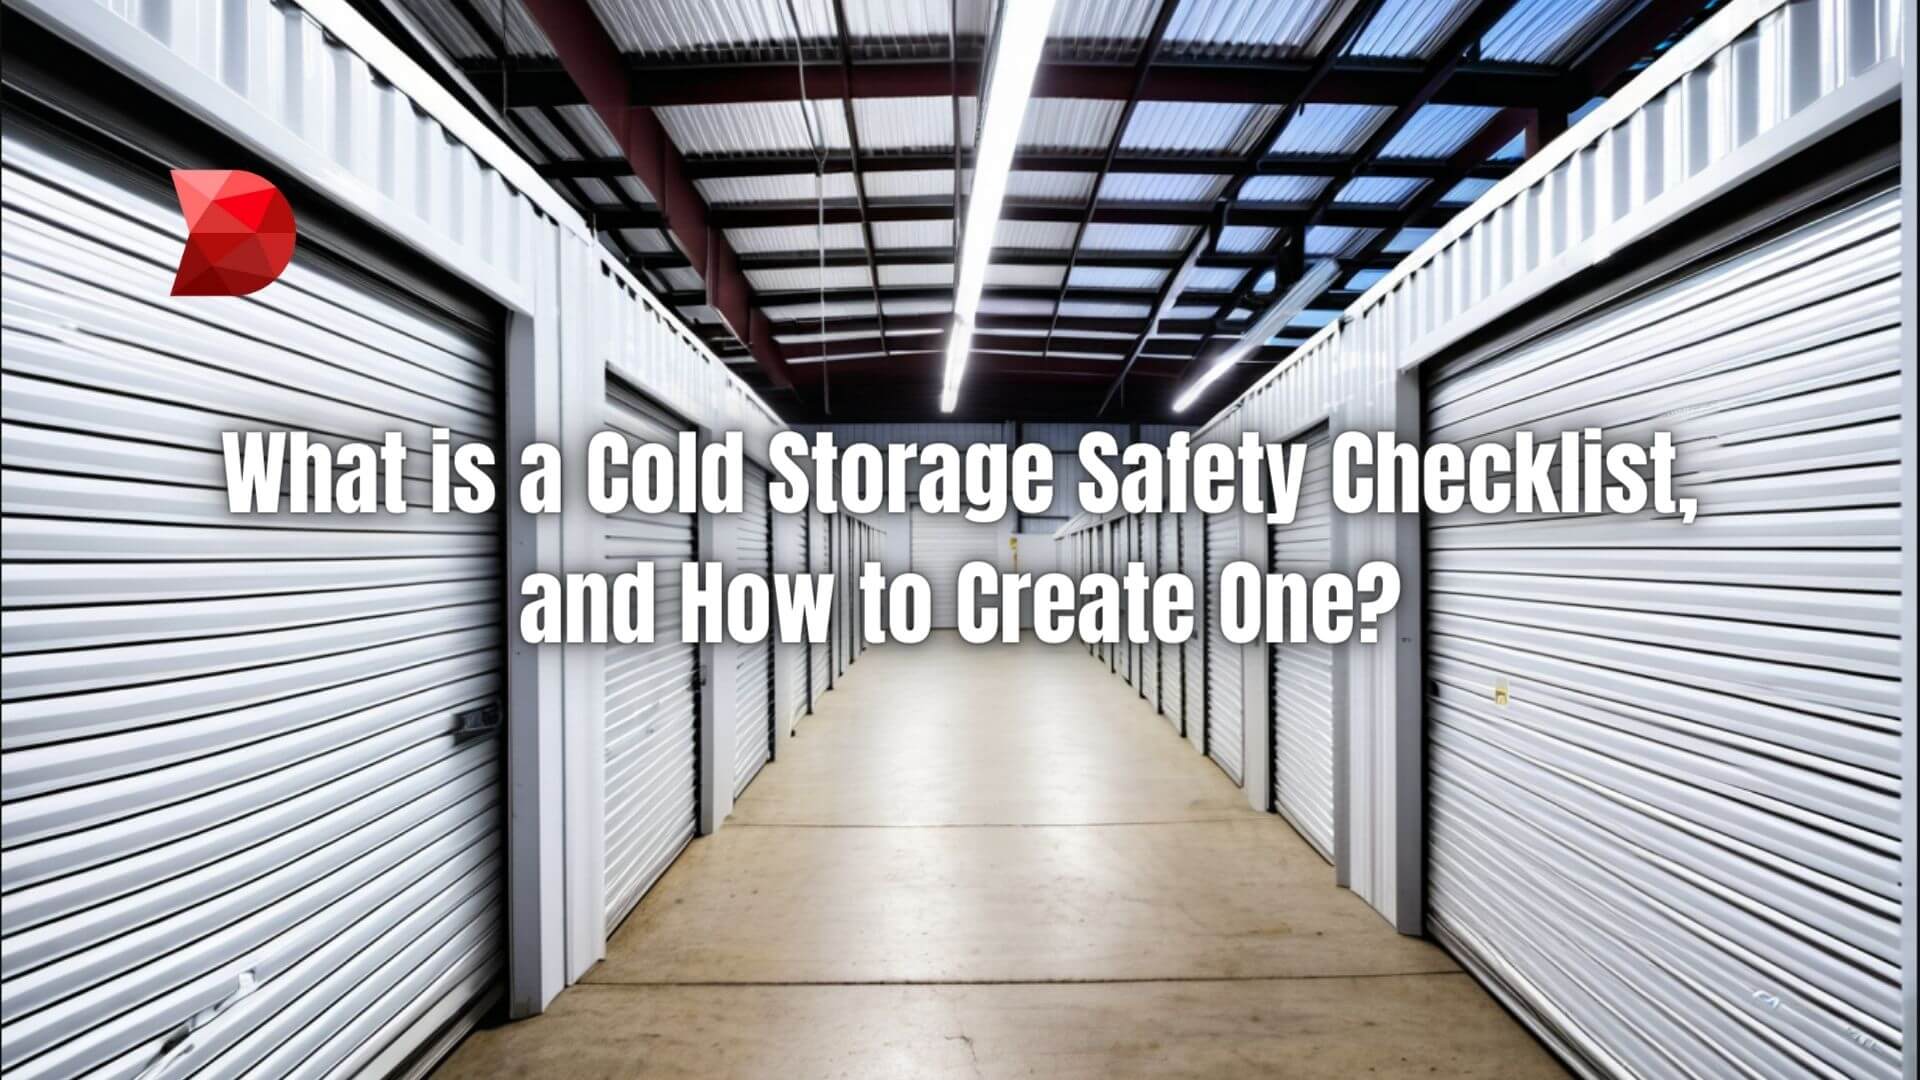 The Cold Storage Safety Checklist is vital to maintaining safe working conditions in cold storage facilities. Here's how to make one!